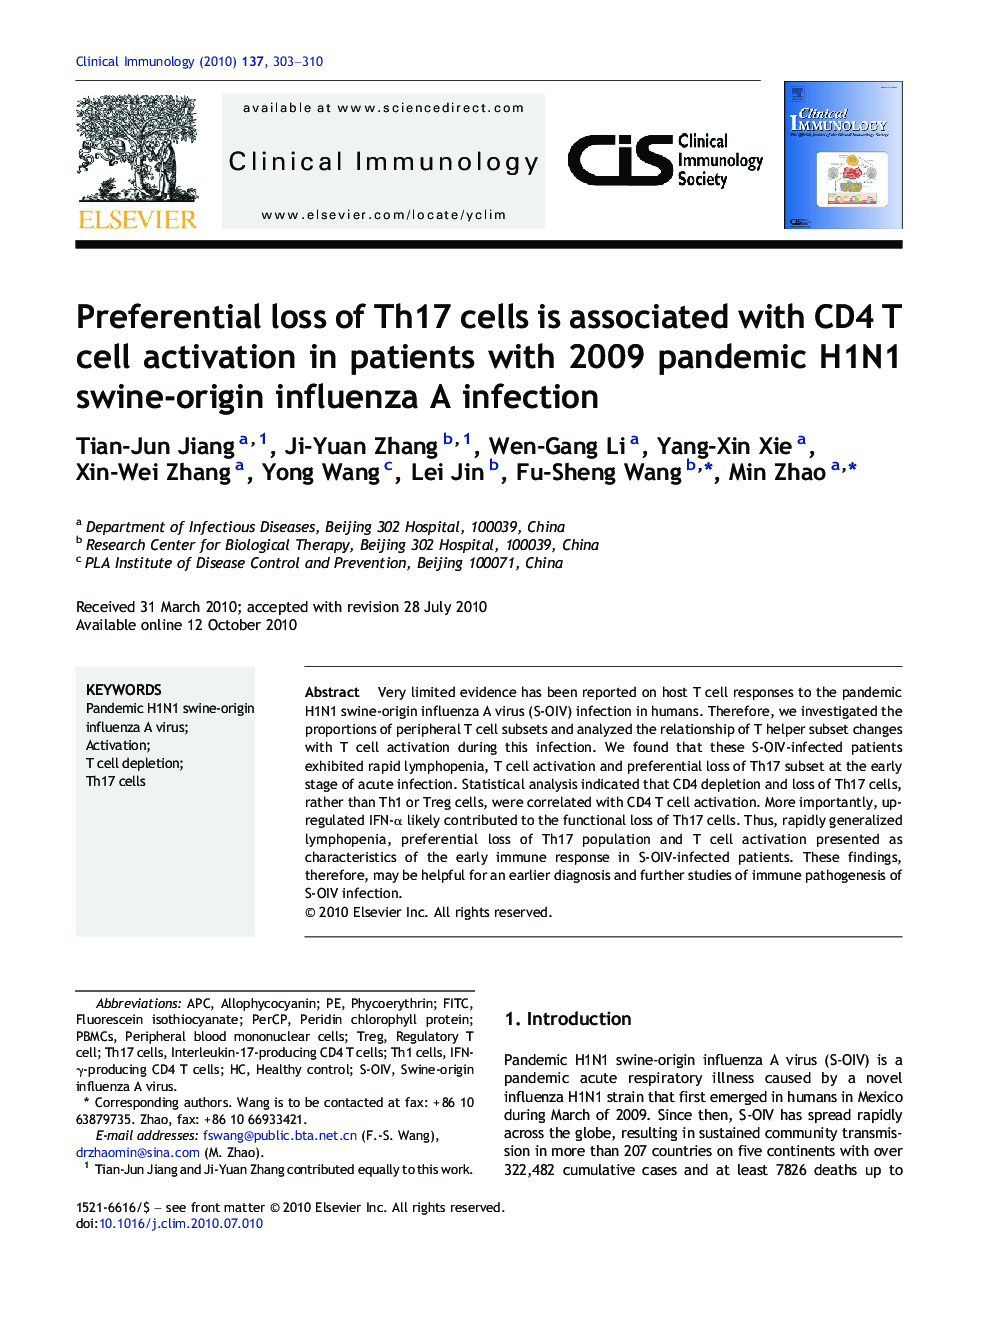 Preferential loss of Th17 cells is associated with CD4 T cell activation in patients with 2009 pandemic H1N1 swine-origin influenza A infection